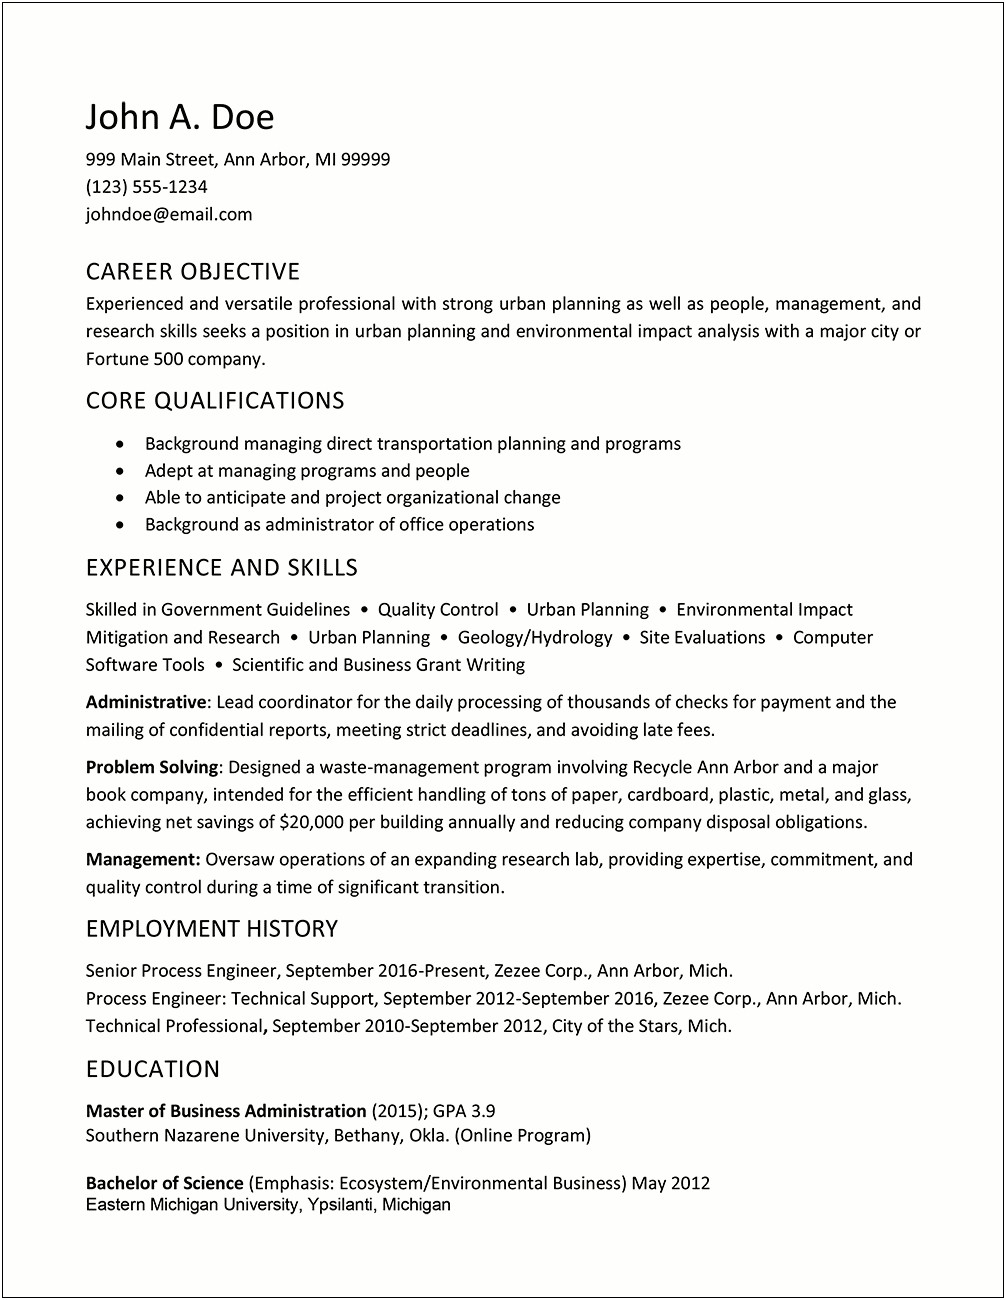 A Sample Of A Functional Resume